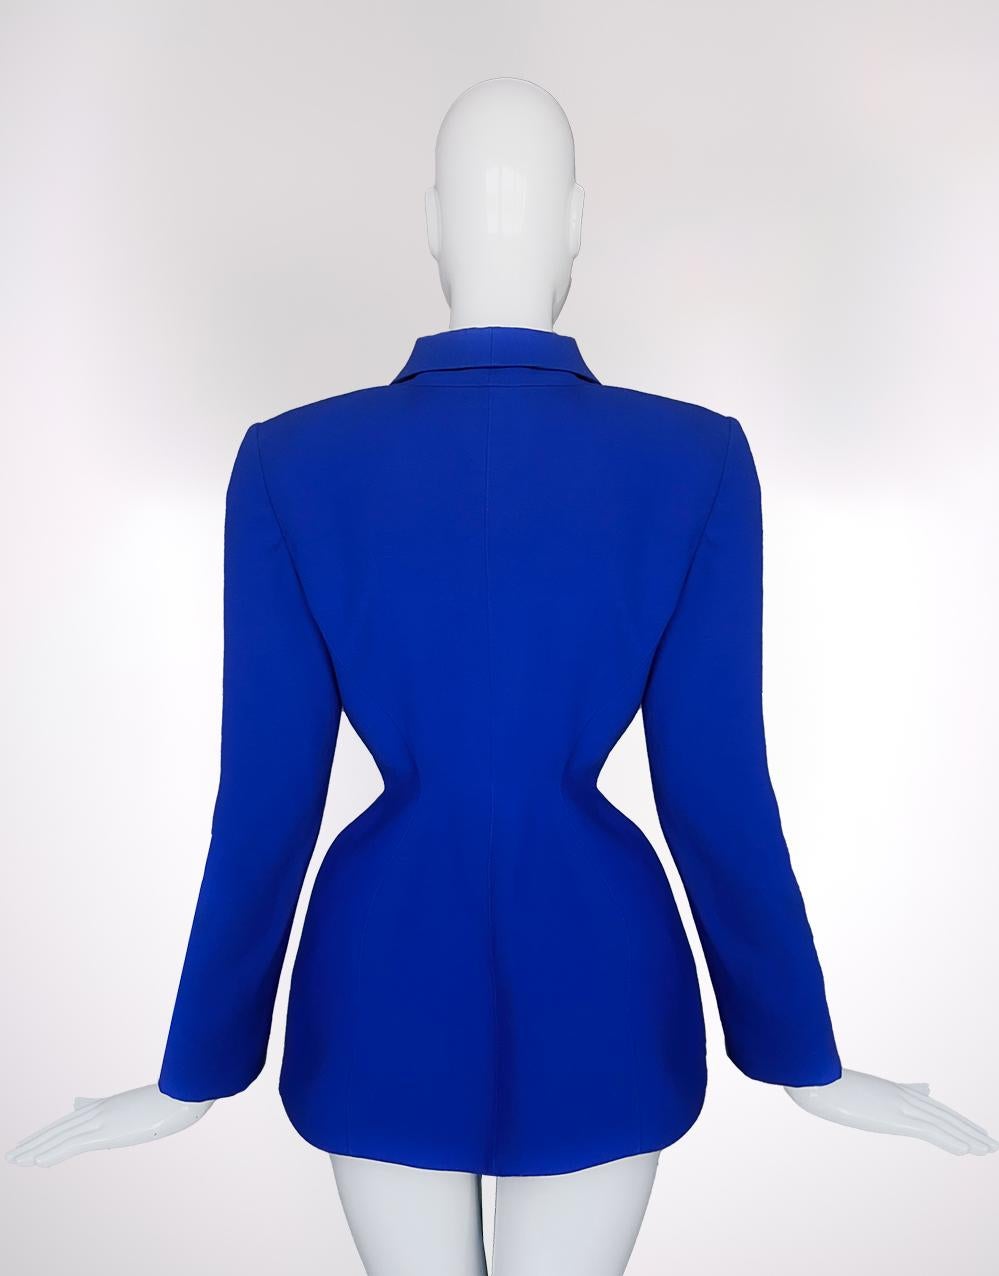 Women's Thierry Mugler FW 1998 Blue Jacket with Dramatic Black Velvet Details For Sale